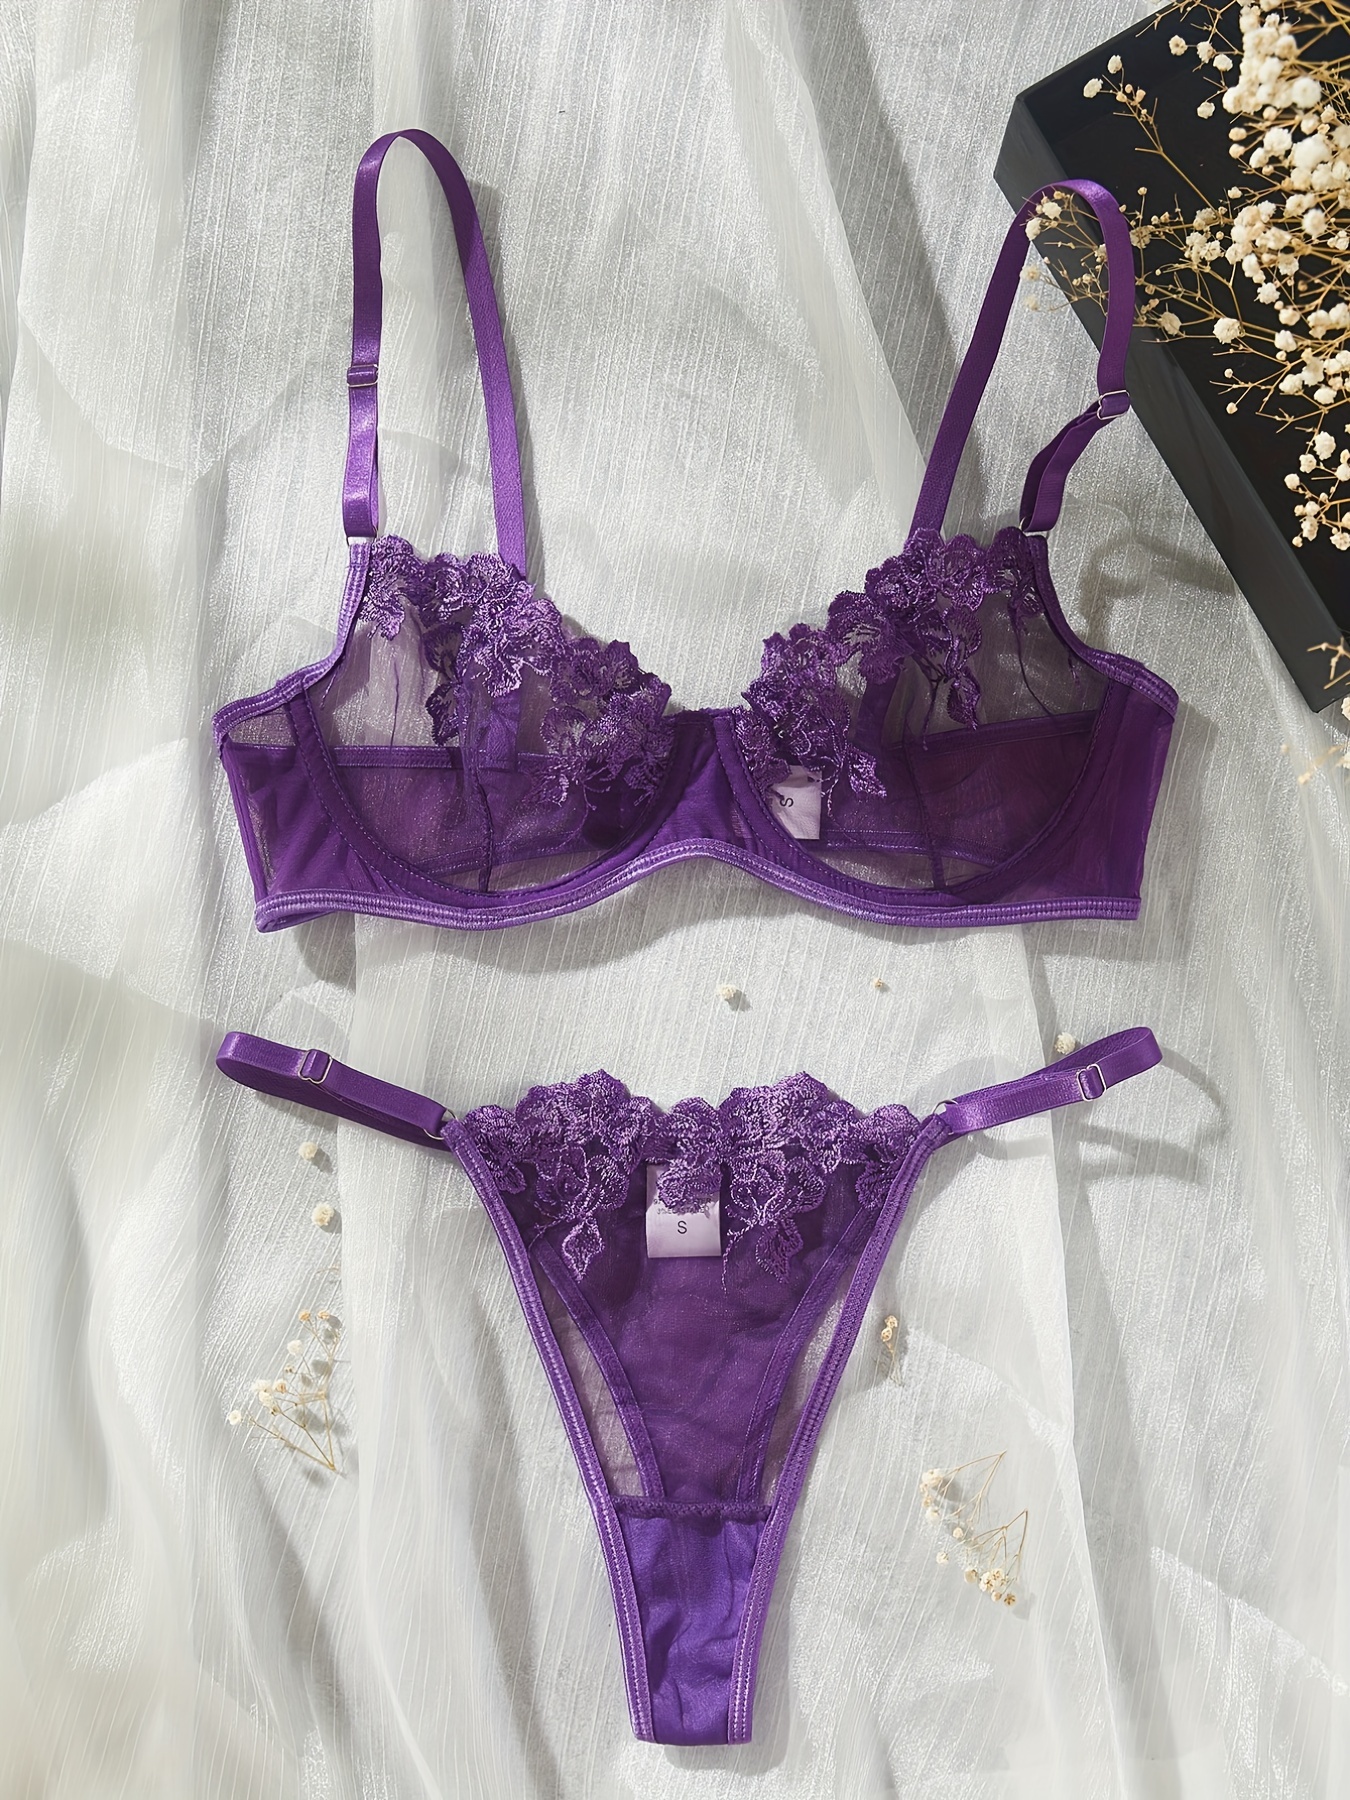  Women's Bra, Bra and Panties, Top and Bottom Set, Embroidery,  Flashy, Floral Pattern, Gorgeous Women's Underwear, purple : Clothing,  Shoes & Jewelry